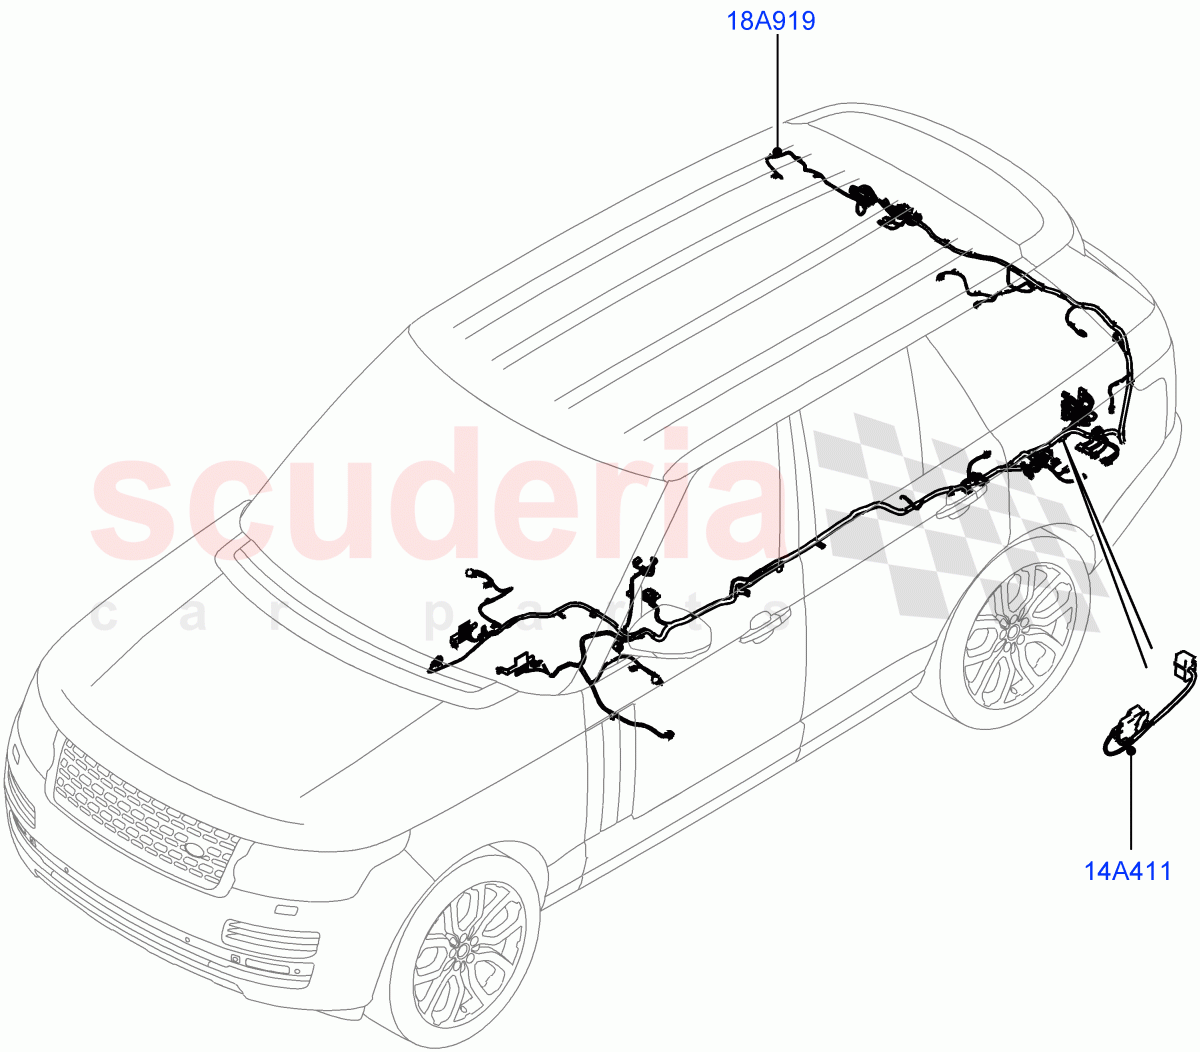 Electrical Wiring - Body And Rear(Audio/Navigation/Entertainment)((V)TOGA999999) of Land Rover Land Rover Range Rover (2012-2021) [5.0 OHC SGDI SC V8 Petrol]